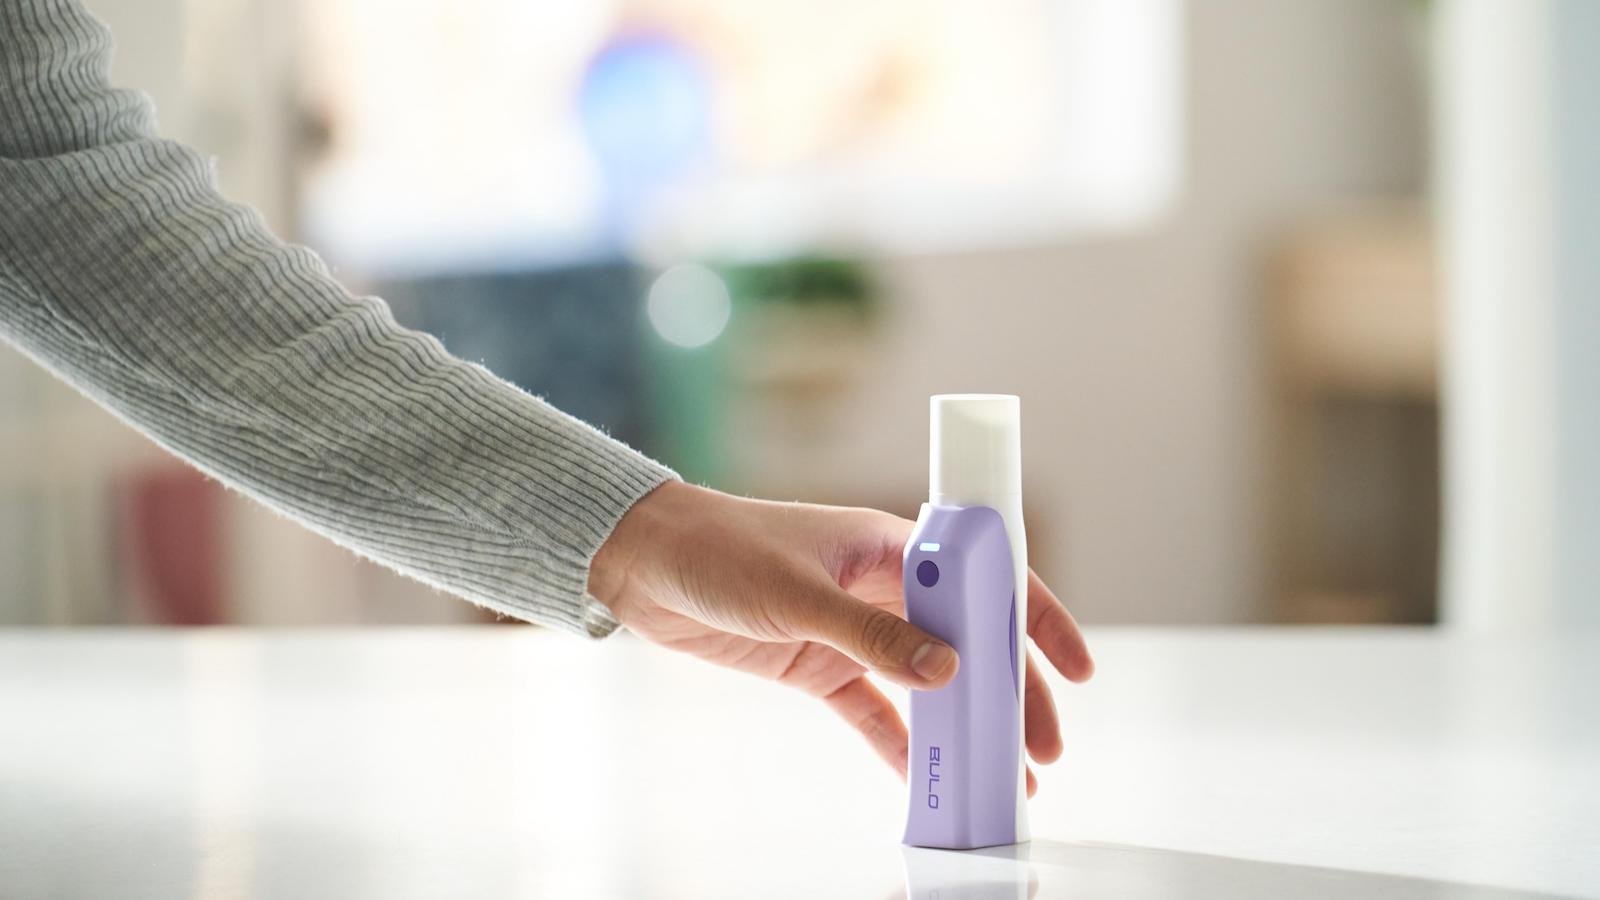 Breathings BULO breathing training assistant tracks and improves your lung health